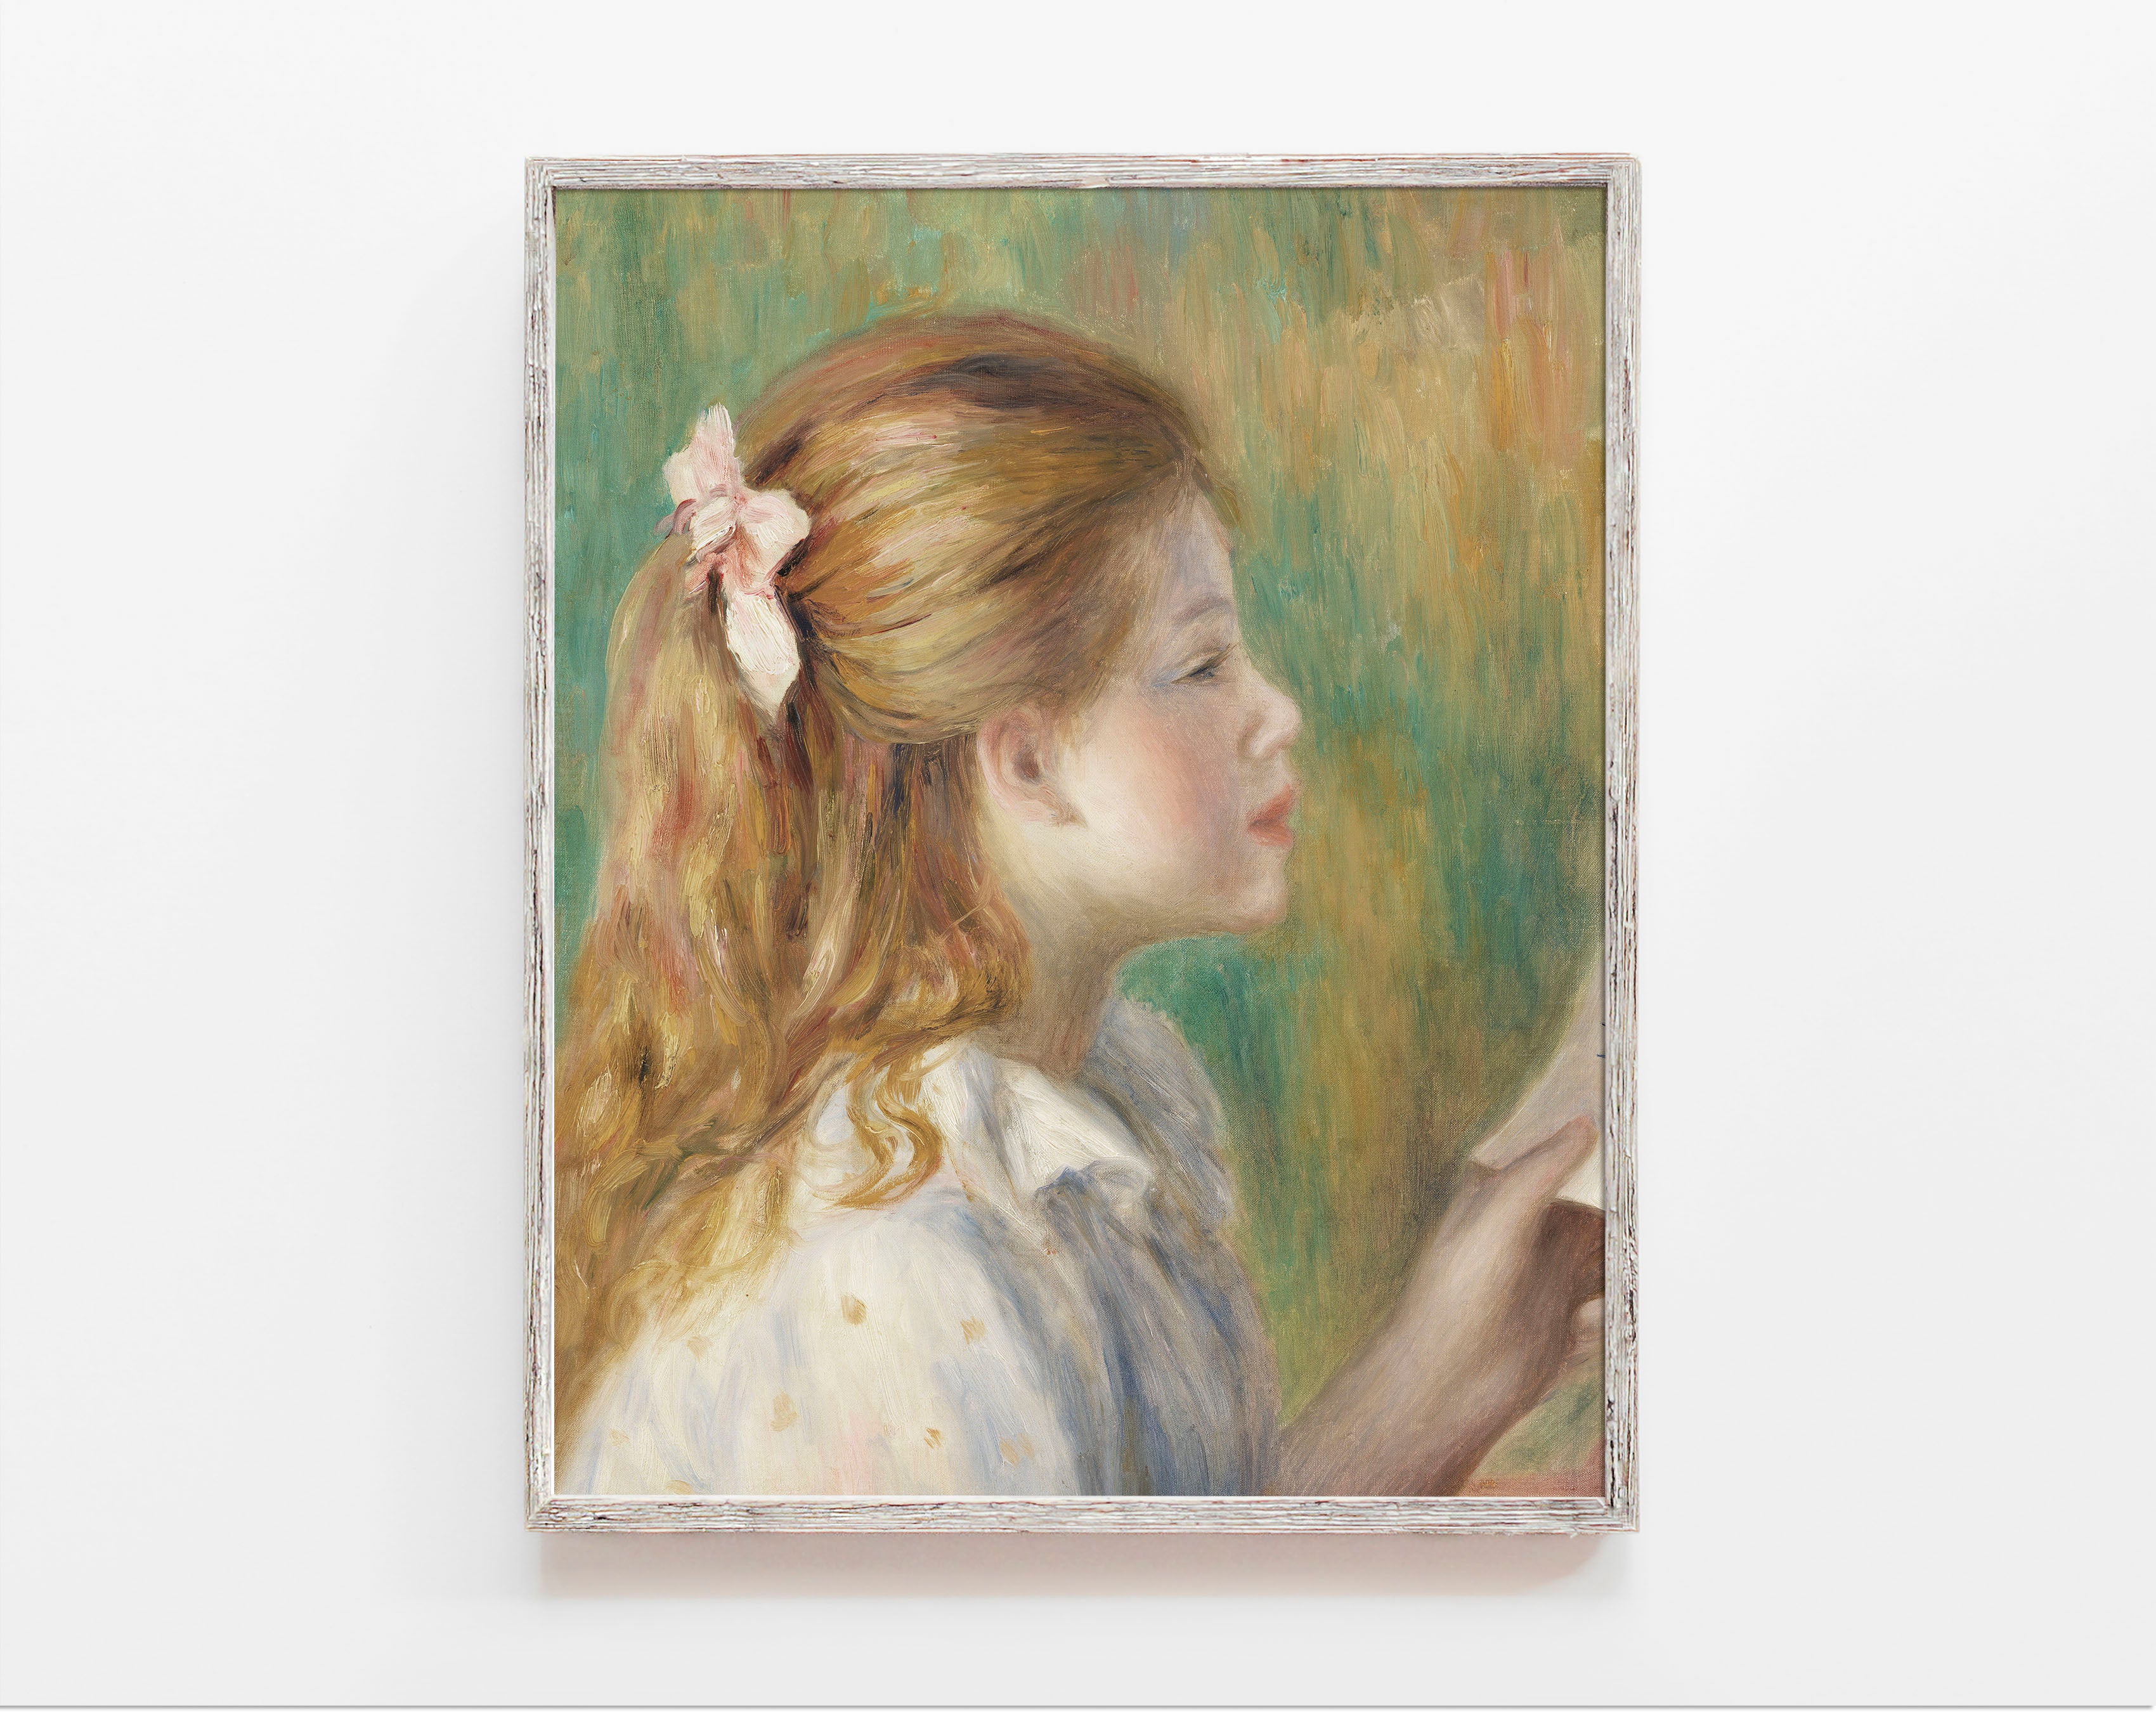 Young Blonde Girl Reading Book Oil Painting